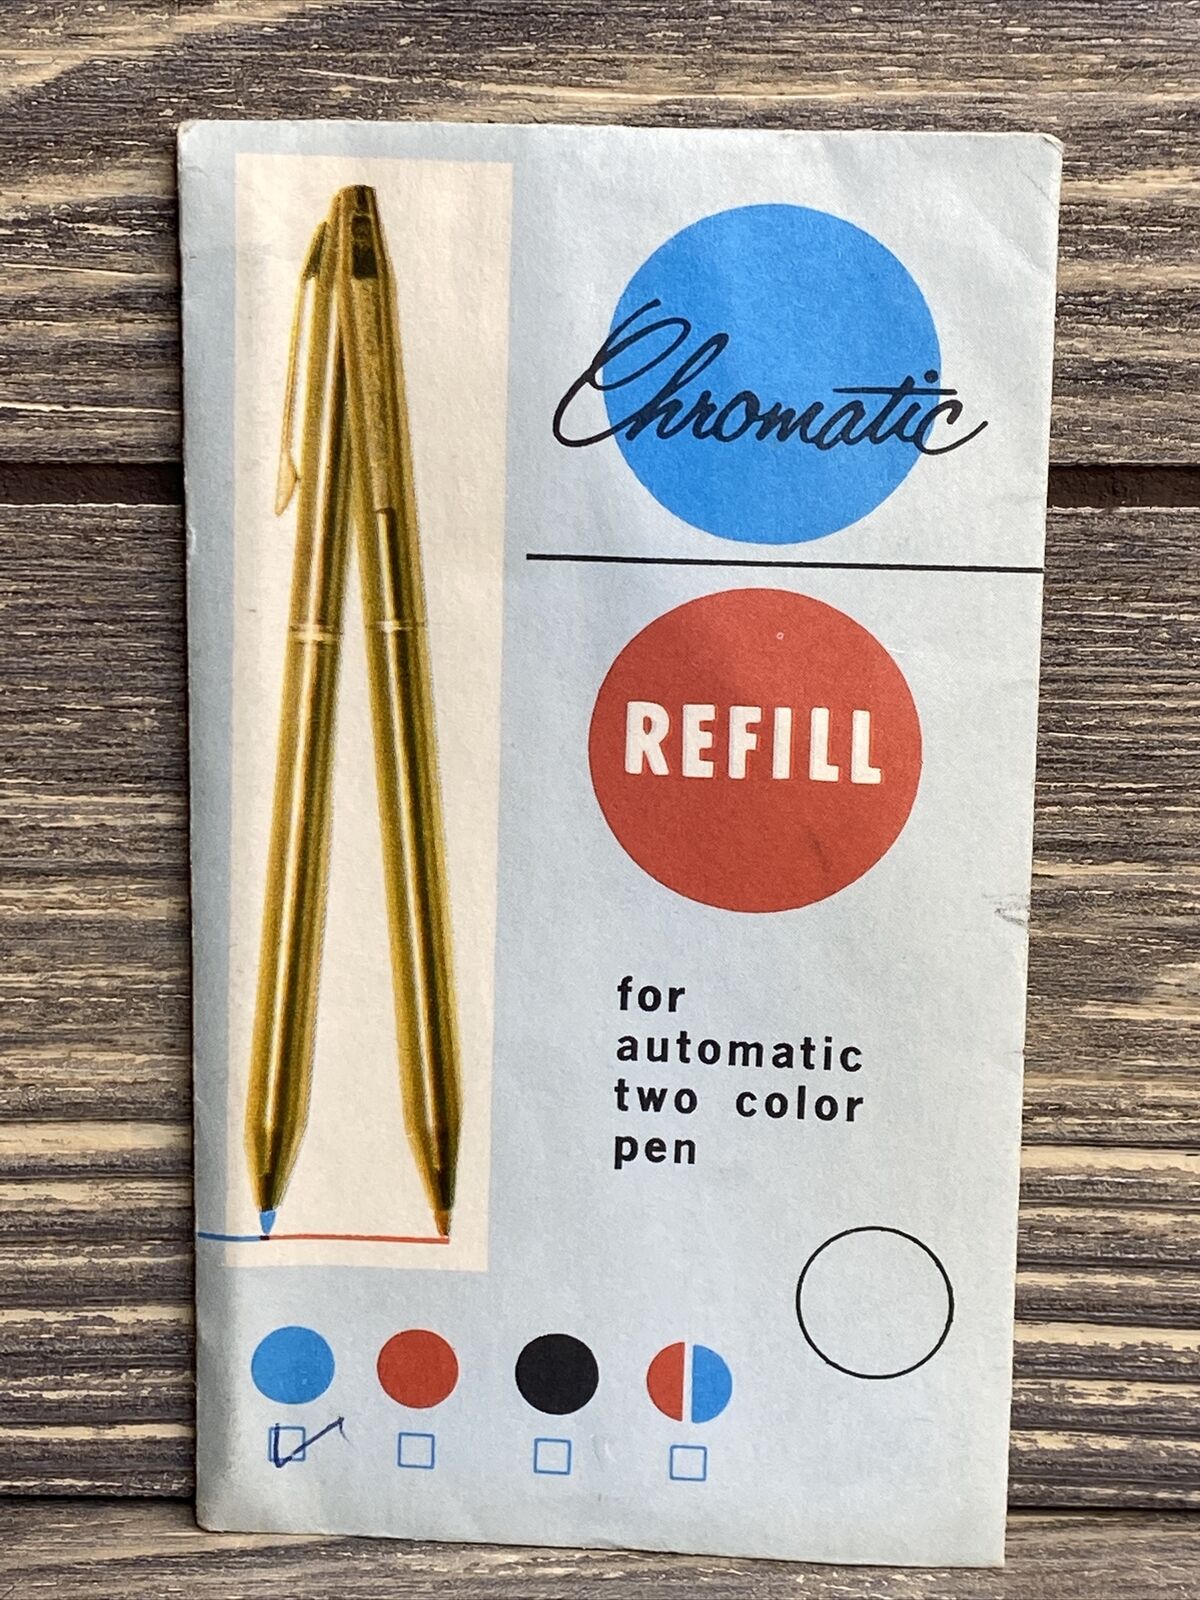 Vintage Chromatic Refill For Automatic Rwo Color Pen Blue Ink A1